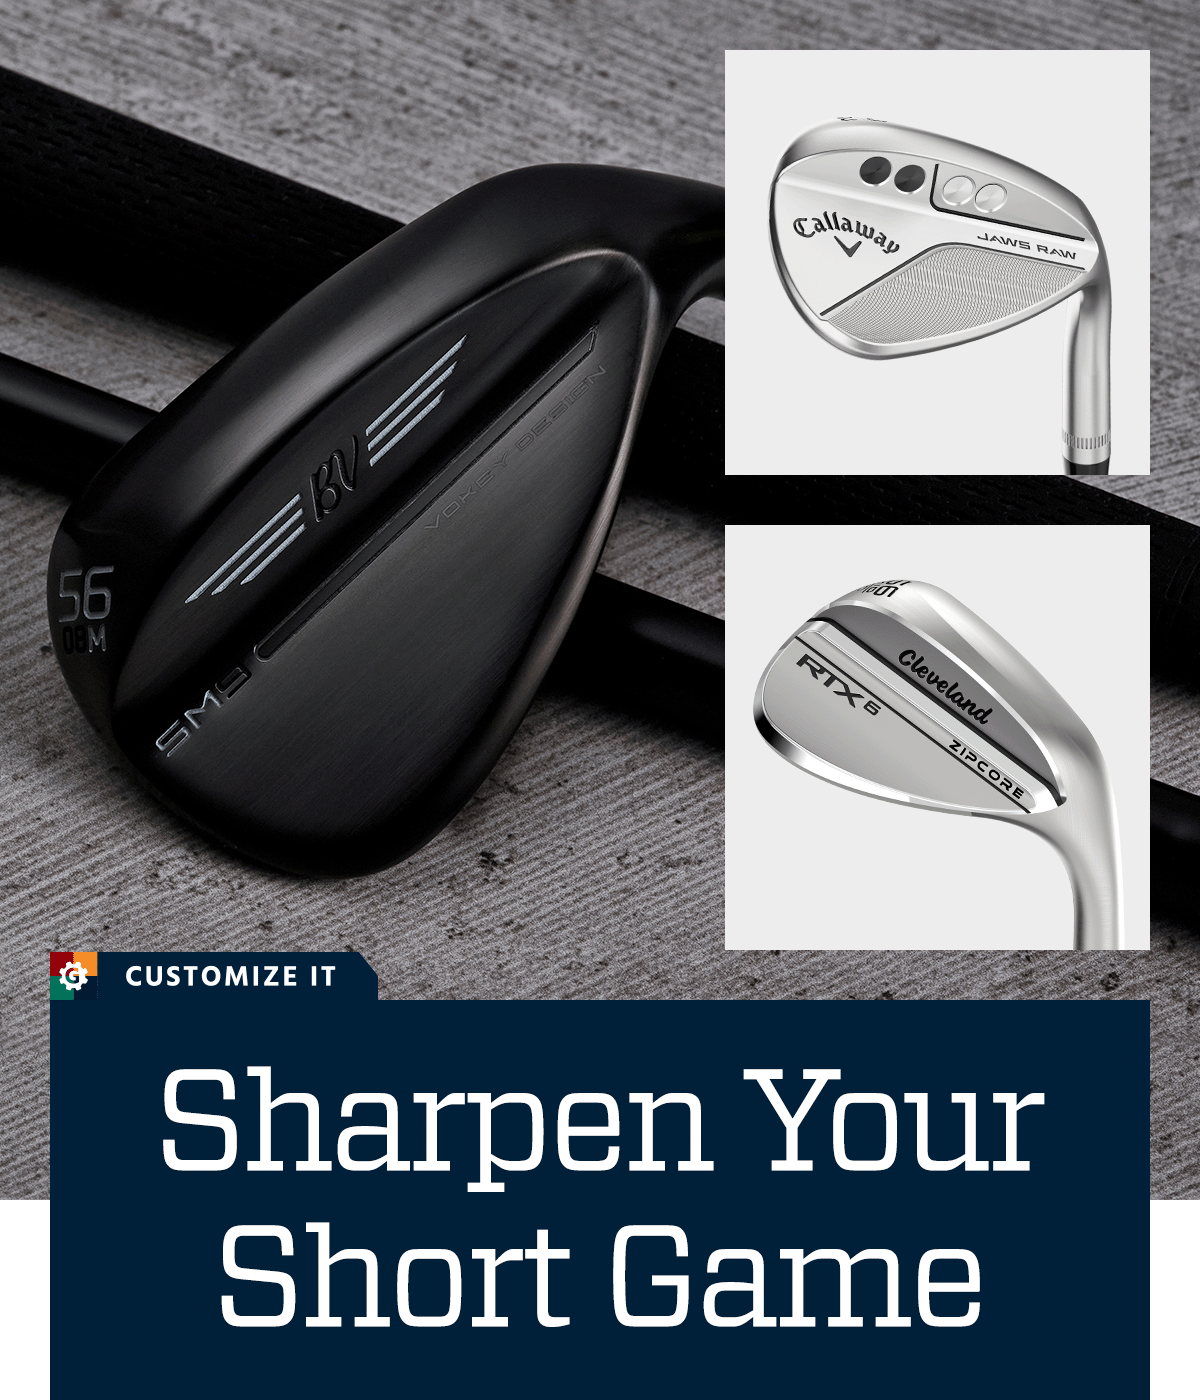 Sharpen your short game. Customize it.